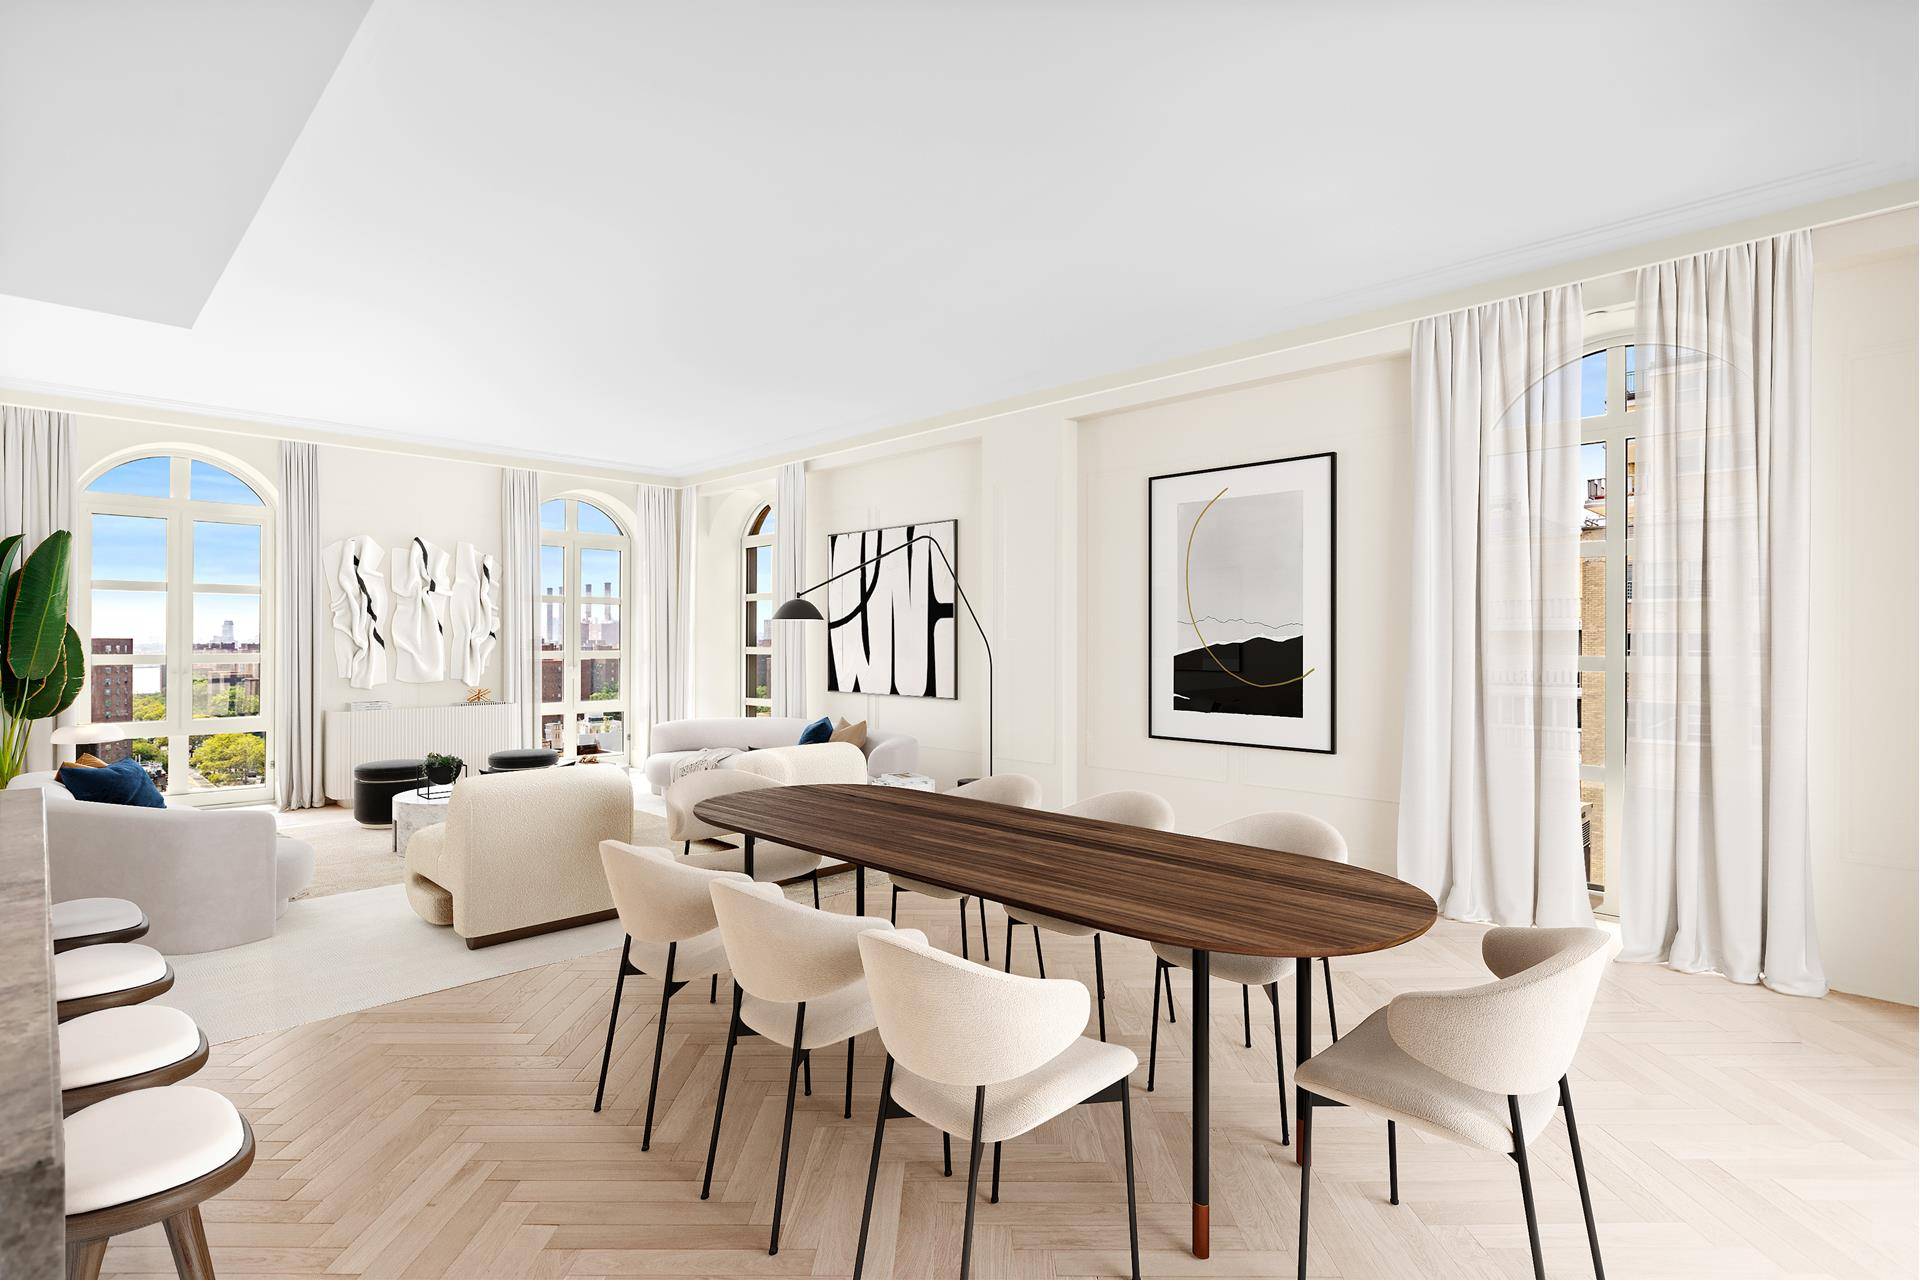 PRICE IMPROVEMENT AT THE BEST NEW DEVELOPMENT IN GRAMERCYDiscover the Penthouse Collection at 250 East 21st Street.